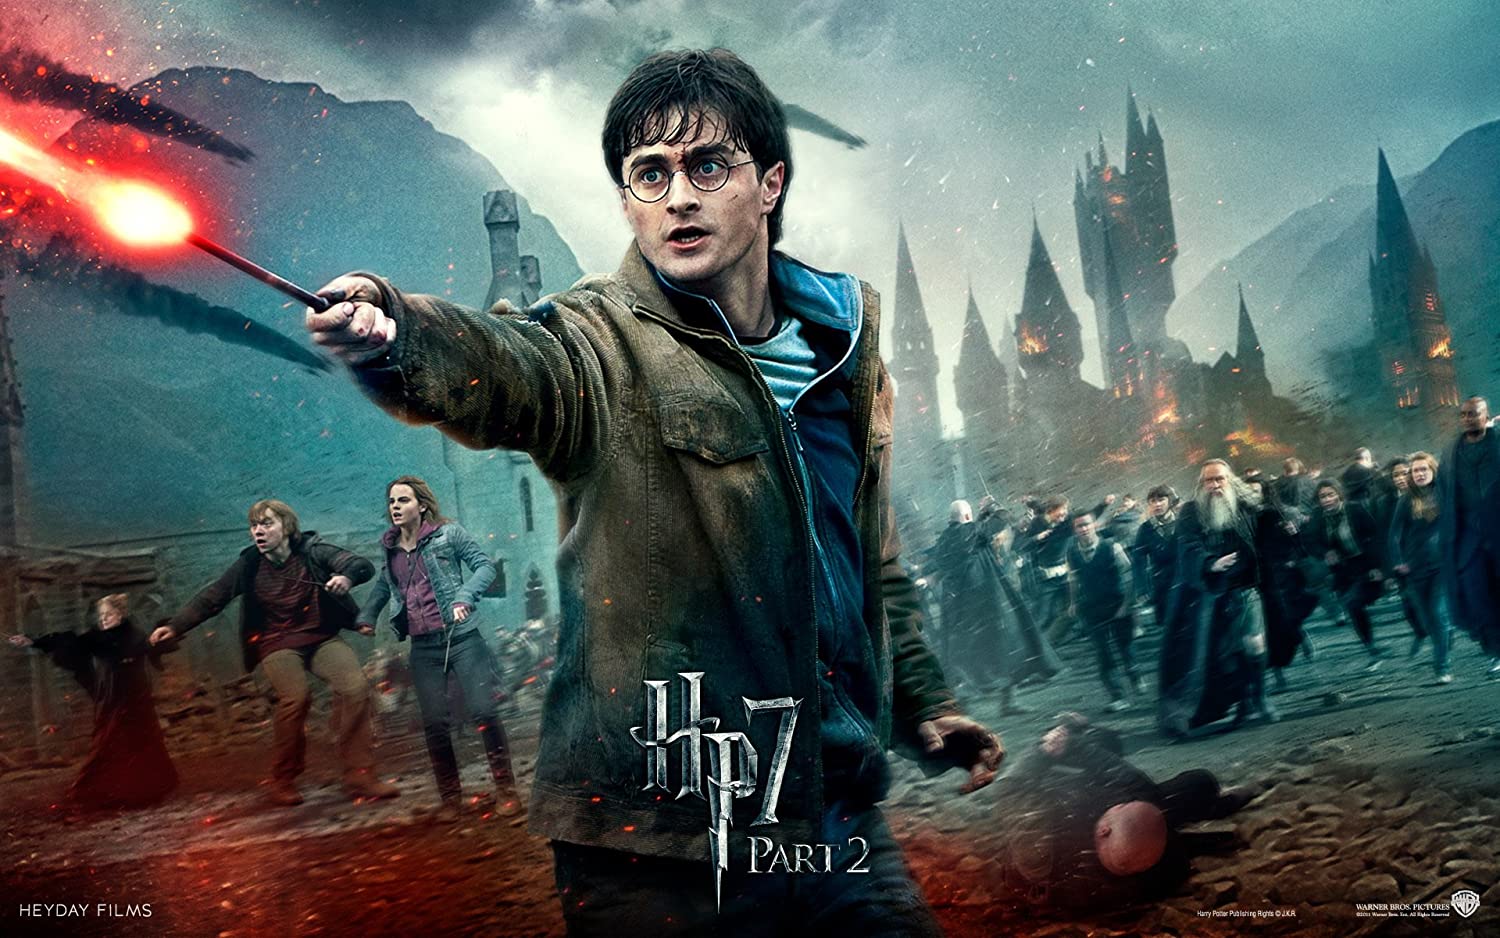 Harry potter and the deathly hallows part 2 poster hd Harry Potter And The Deathly Hallows Part 2 Wallpapers Wallpaper Cave